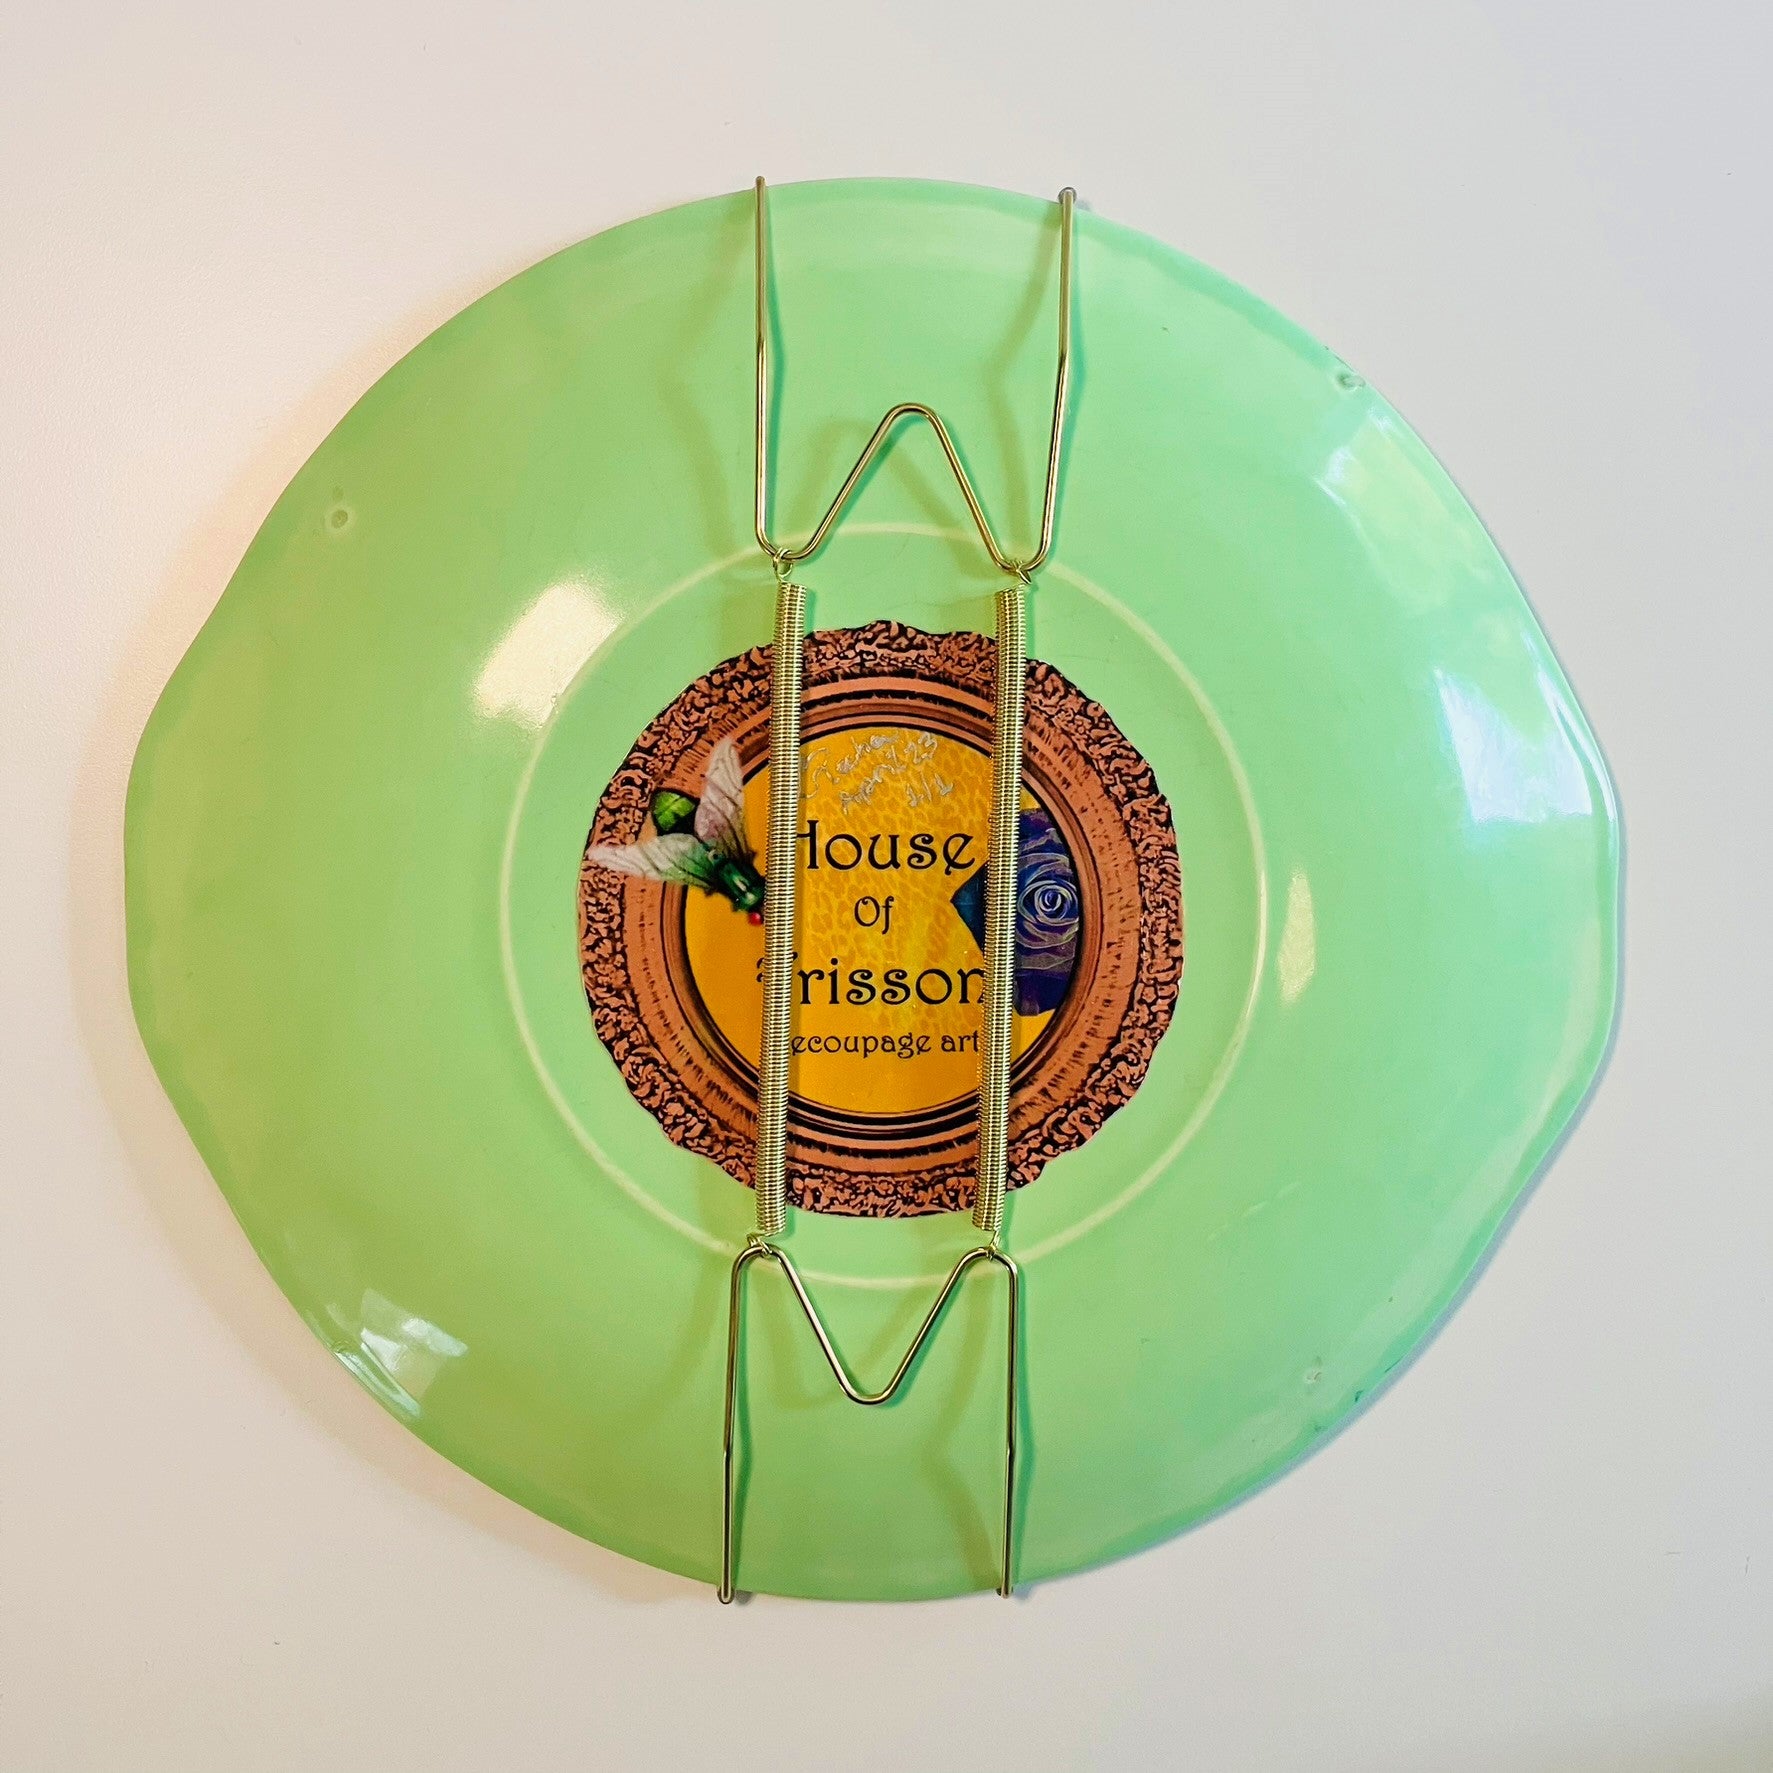 "Cheeky" Wall Plate by House of Frisson, featuring a collage with letters coming out of flowers forming the word "cheeky", and a lizard, on a green background. Showing back of the plate with attached plate hanger.